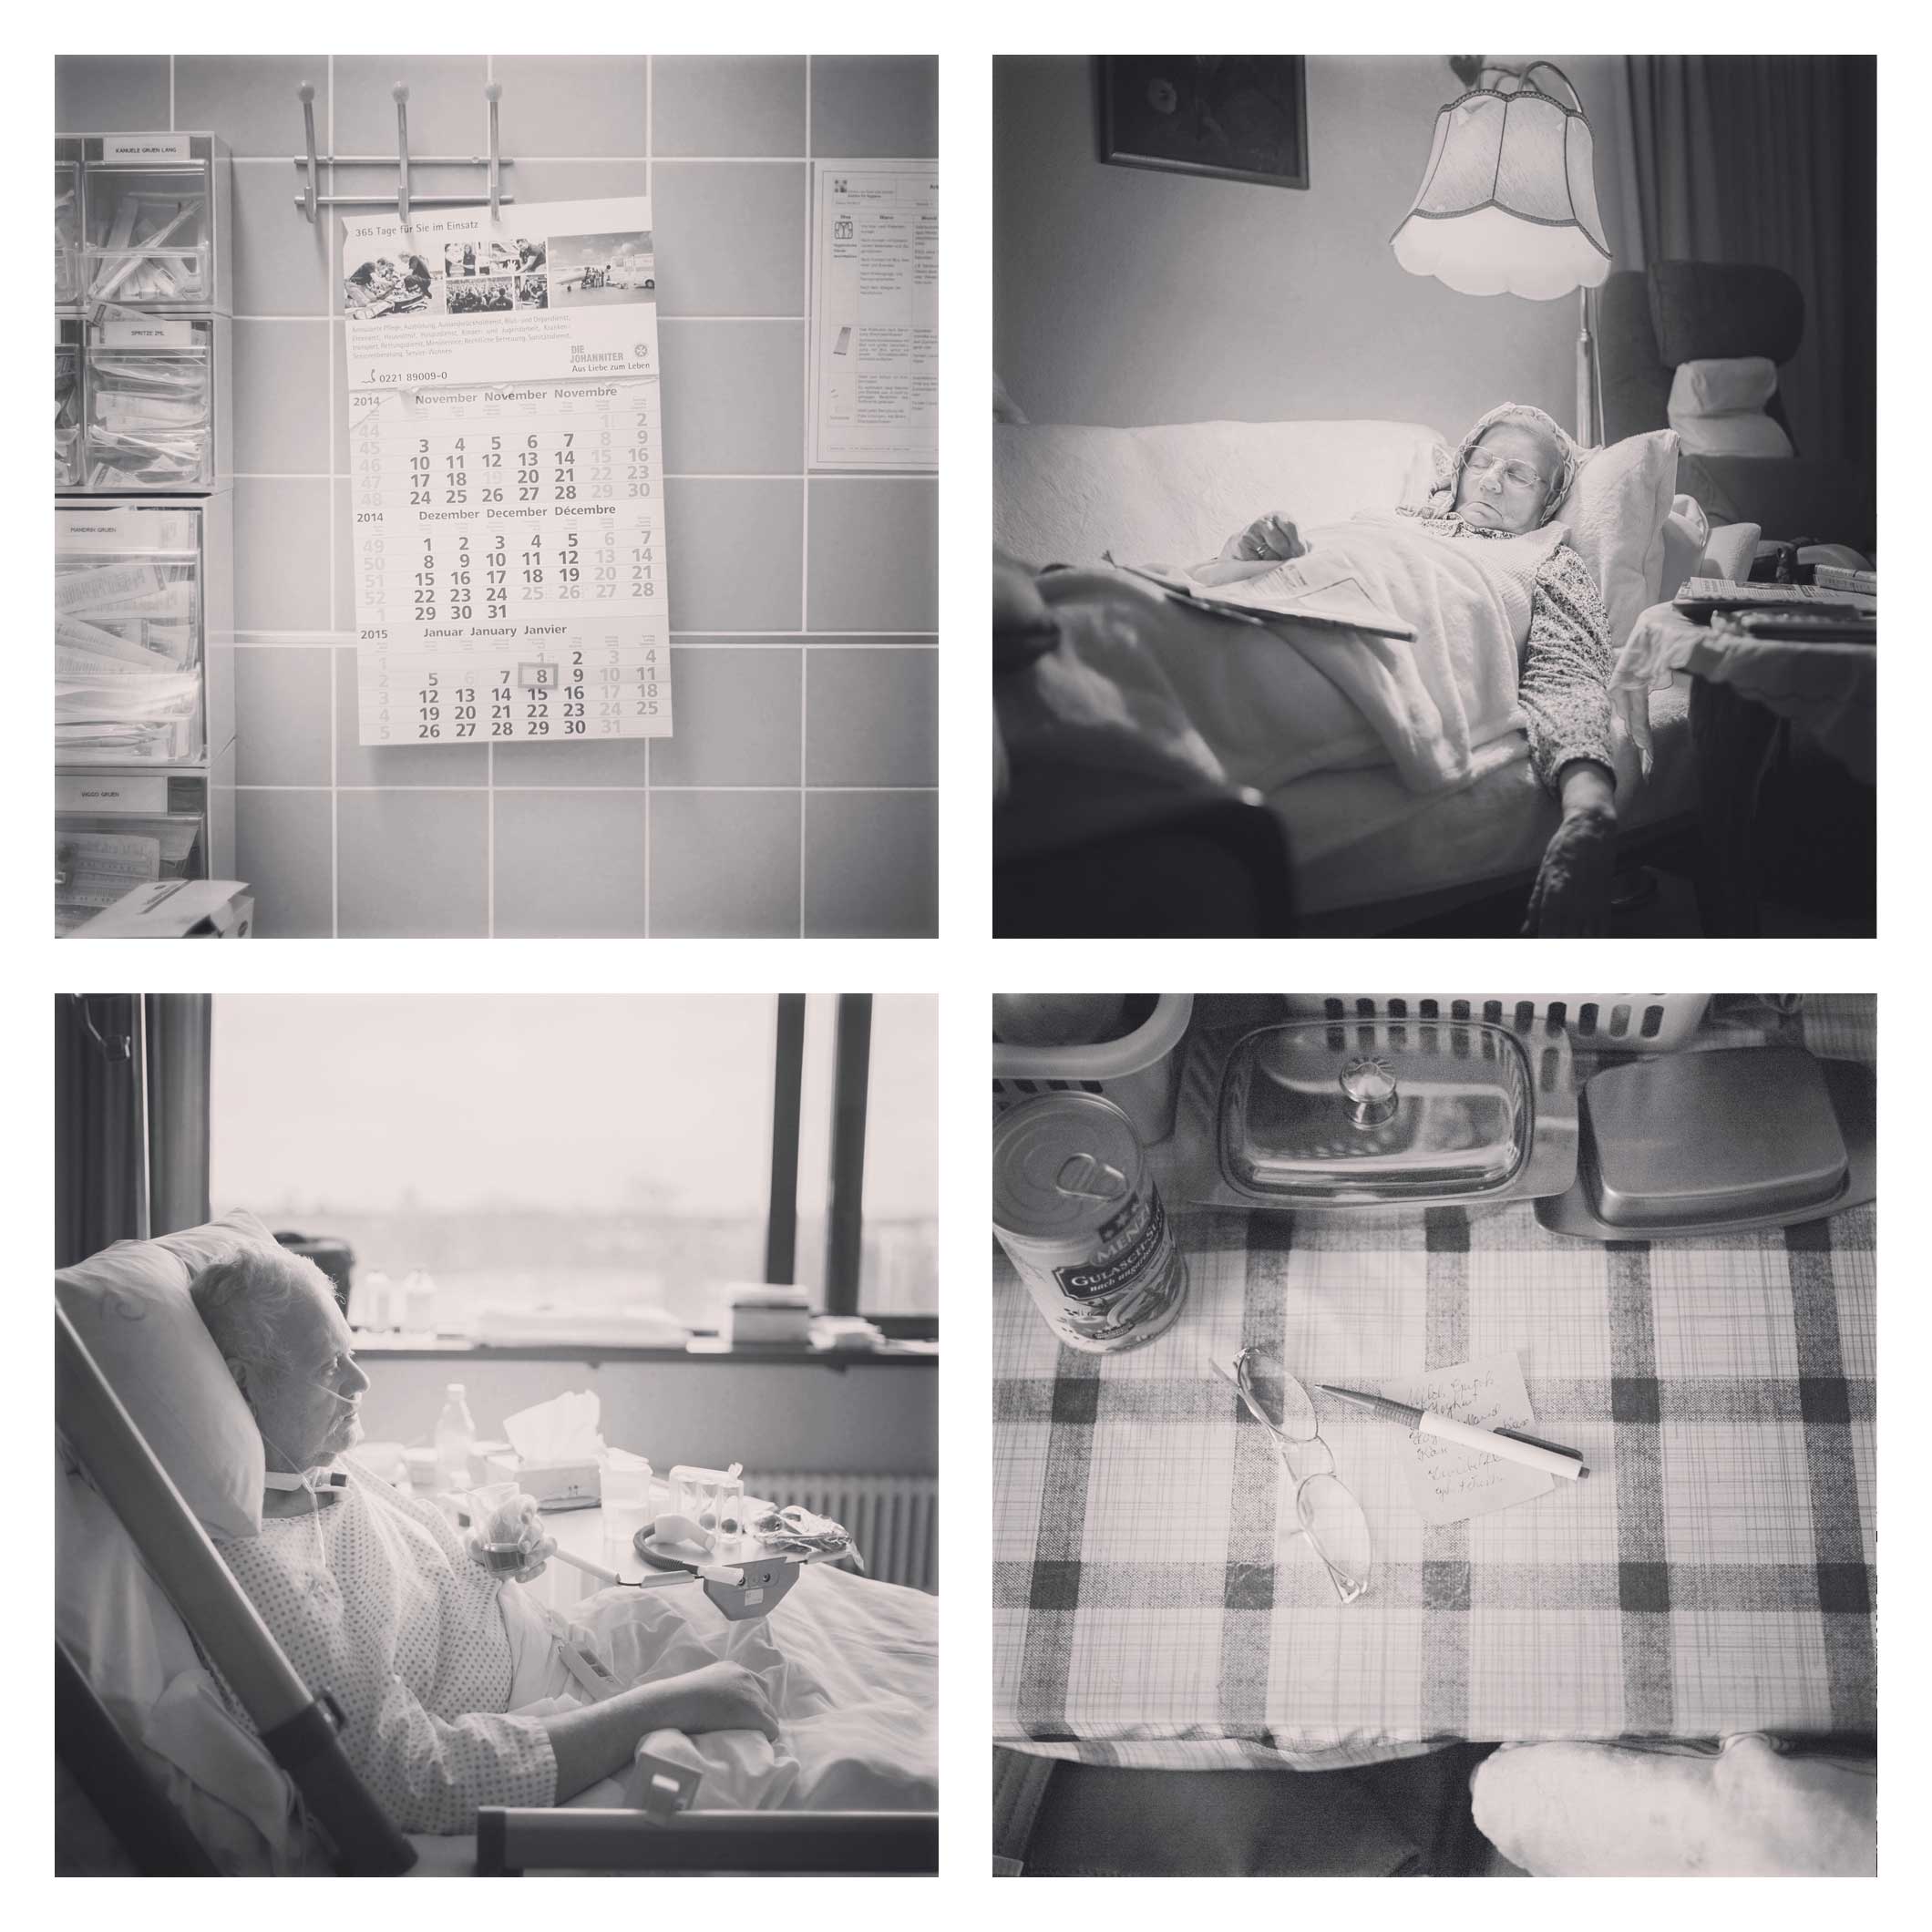 First day in Germany; Oma napping; In his new room; Oma's list